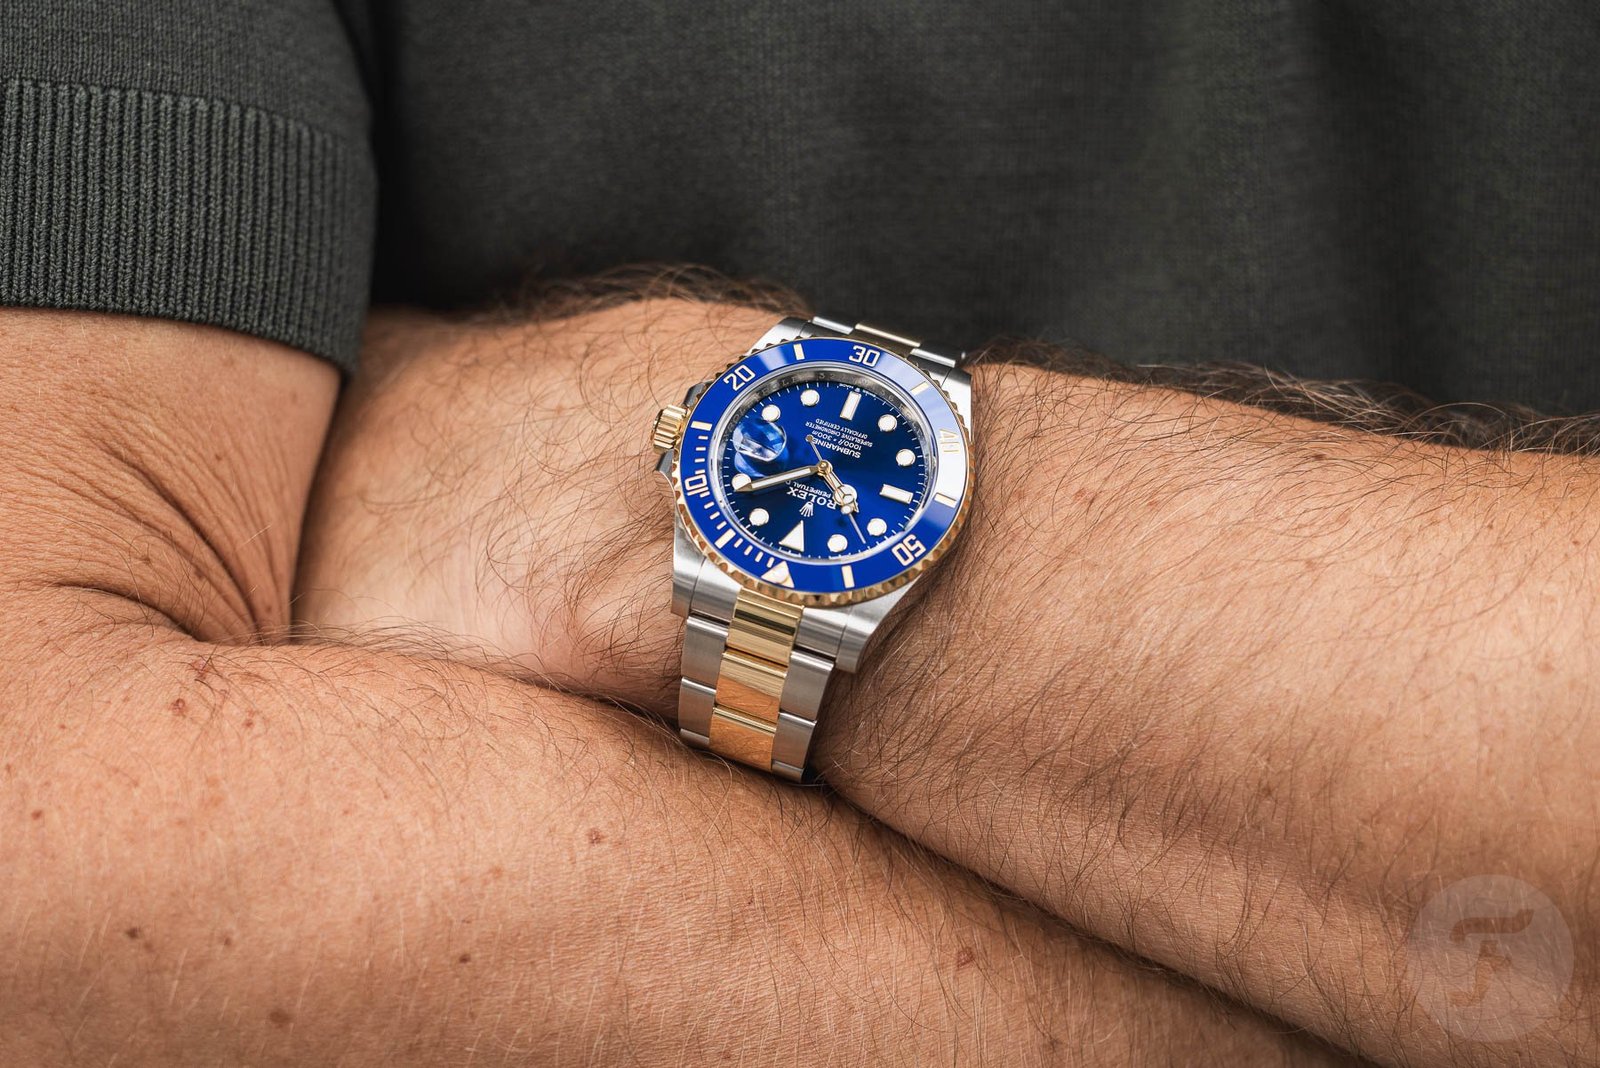 Don’t Wear Your Expensive Watch To The Office Unless…